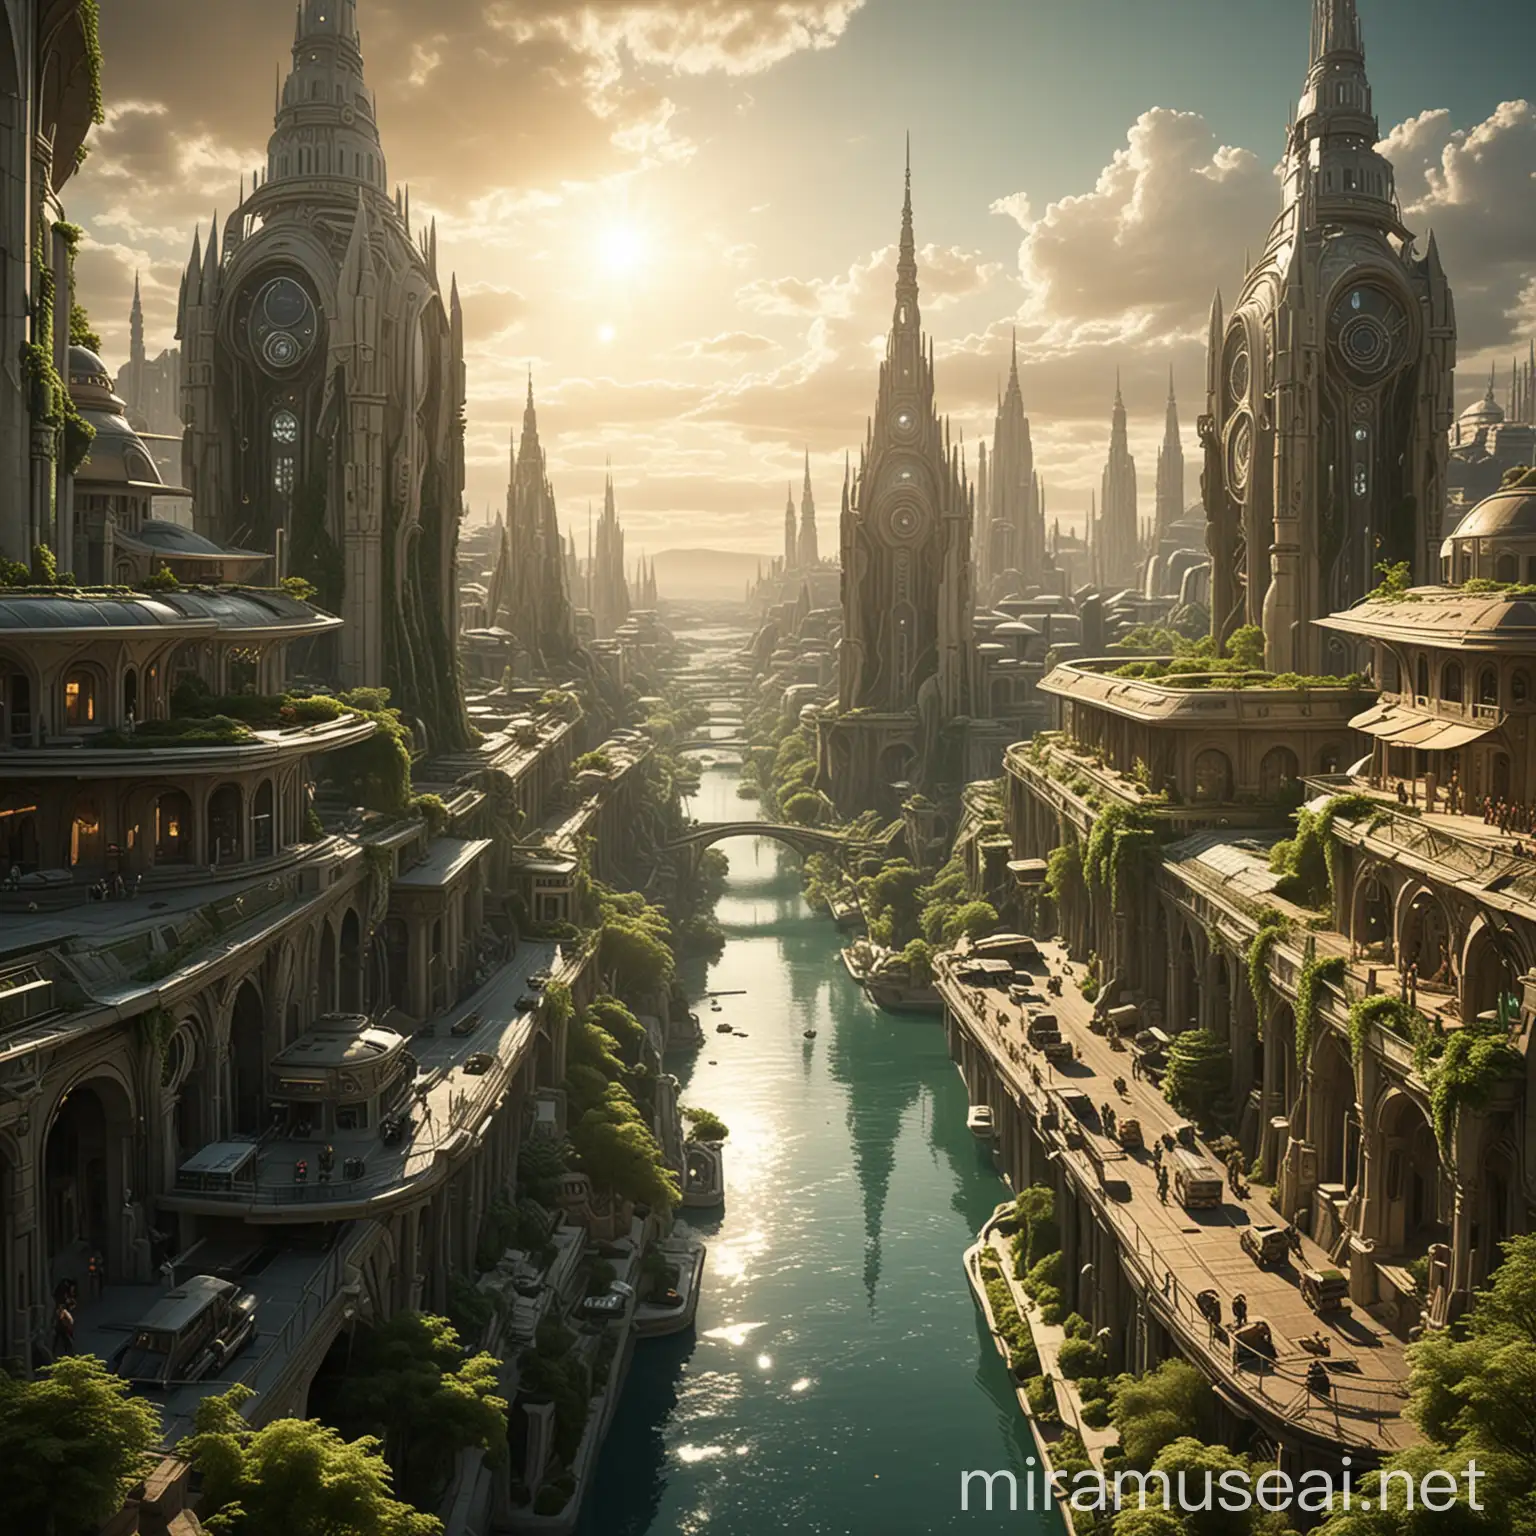 Make a futuristic, solar punk Budapest.
Make it resemble Theed city of Naboo.
Include advanced technology and greenery.